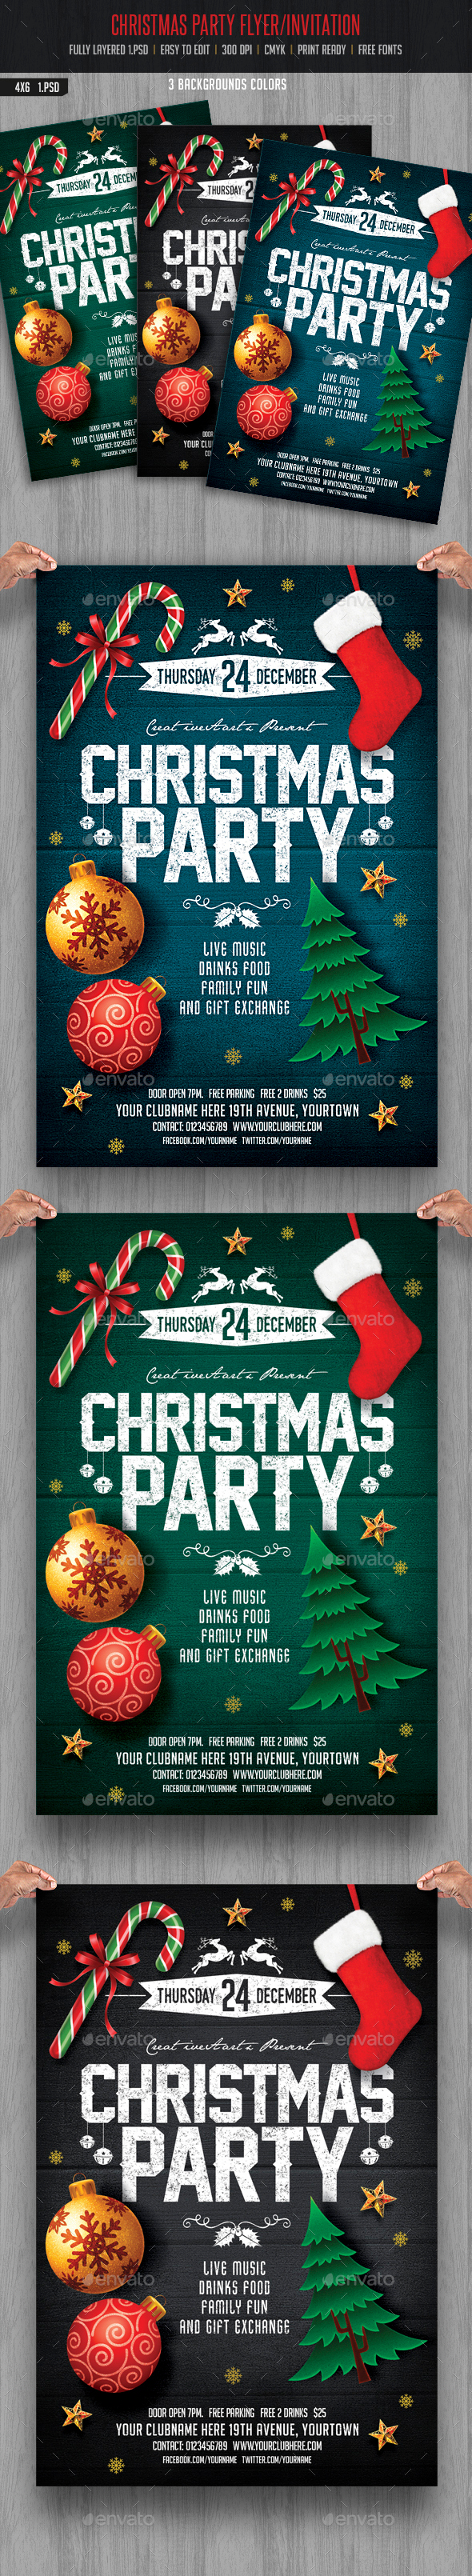 Christmas Party Flyer/ Invitation